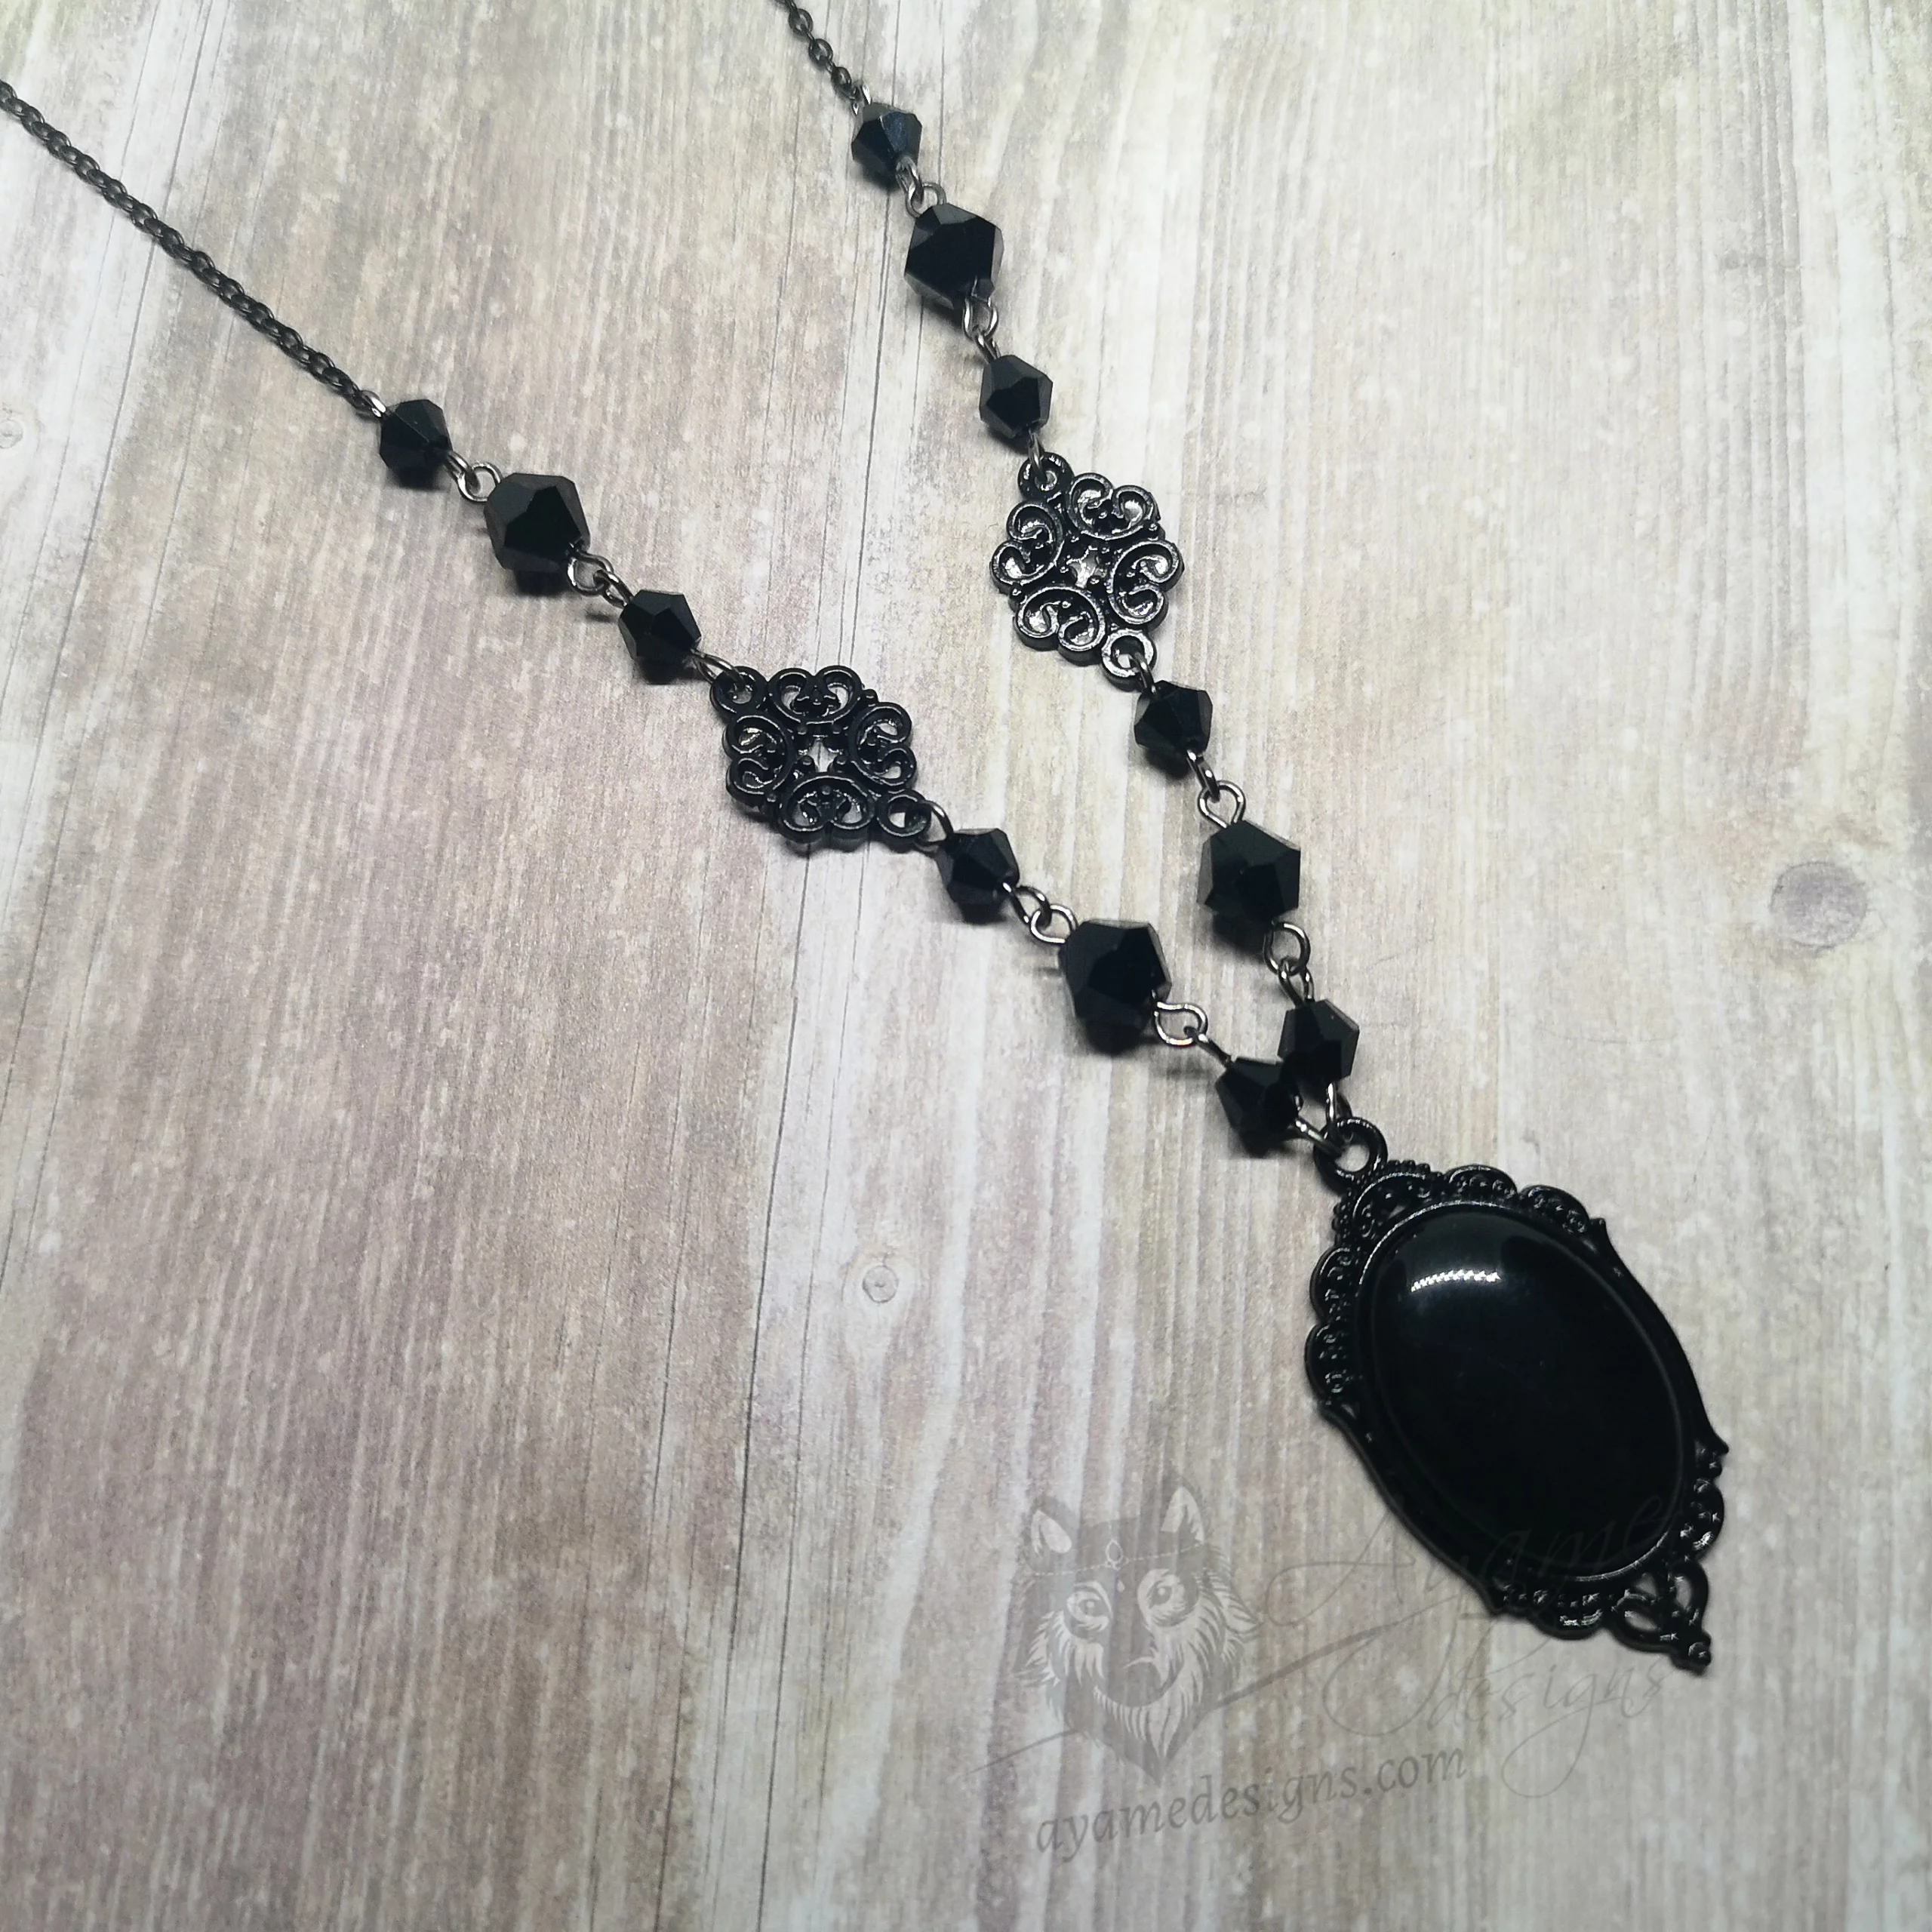 Handmade gothic necklace with a small black resin cabochon in a black filigree frame, black Austrian crystal beads and black stainless steel chain